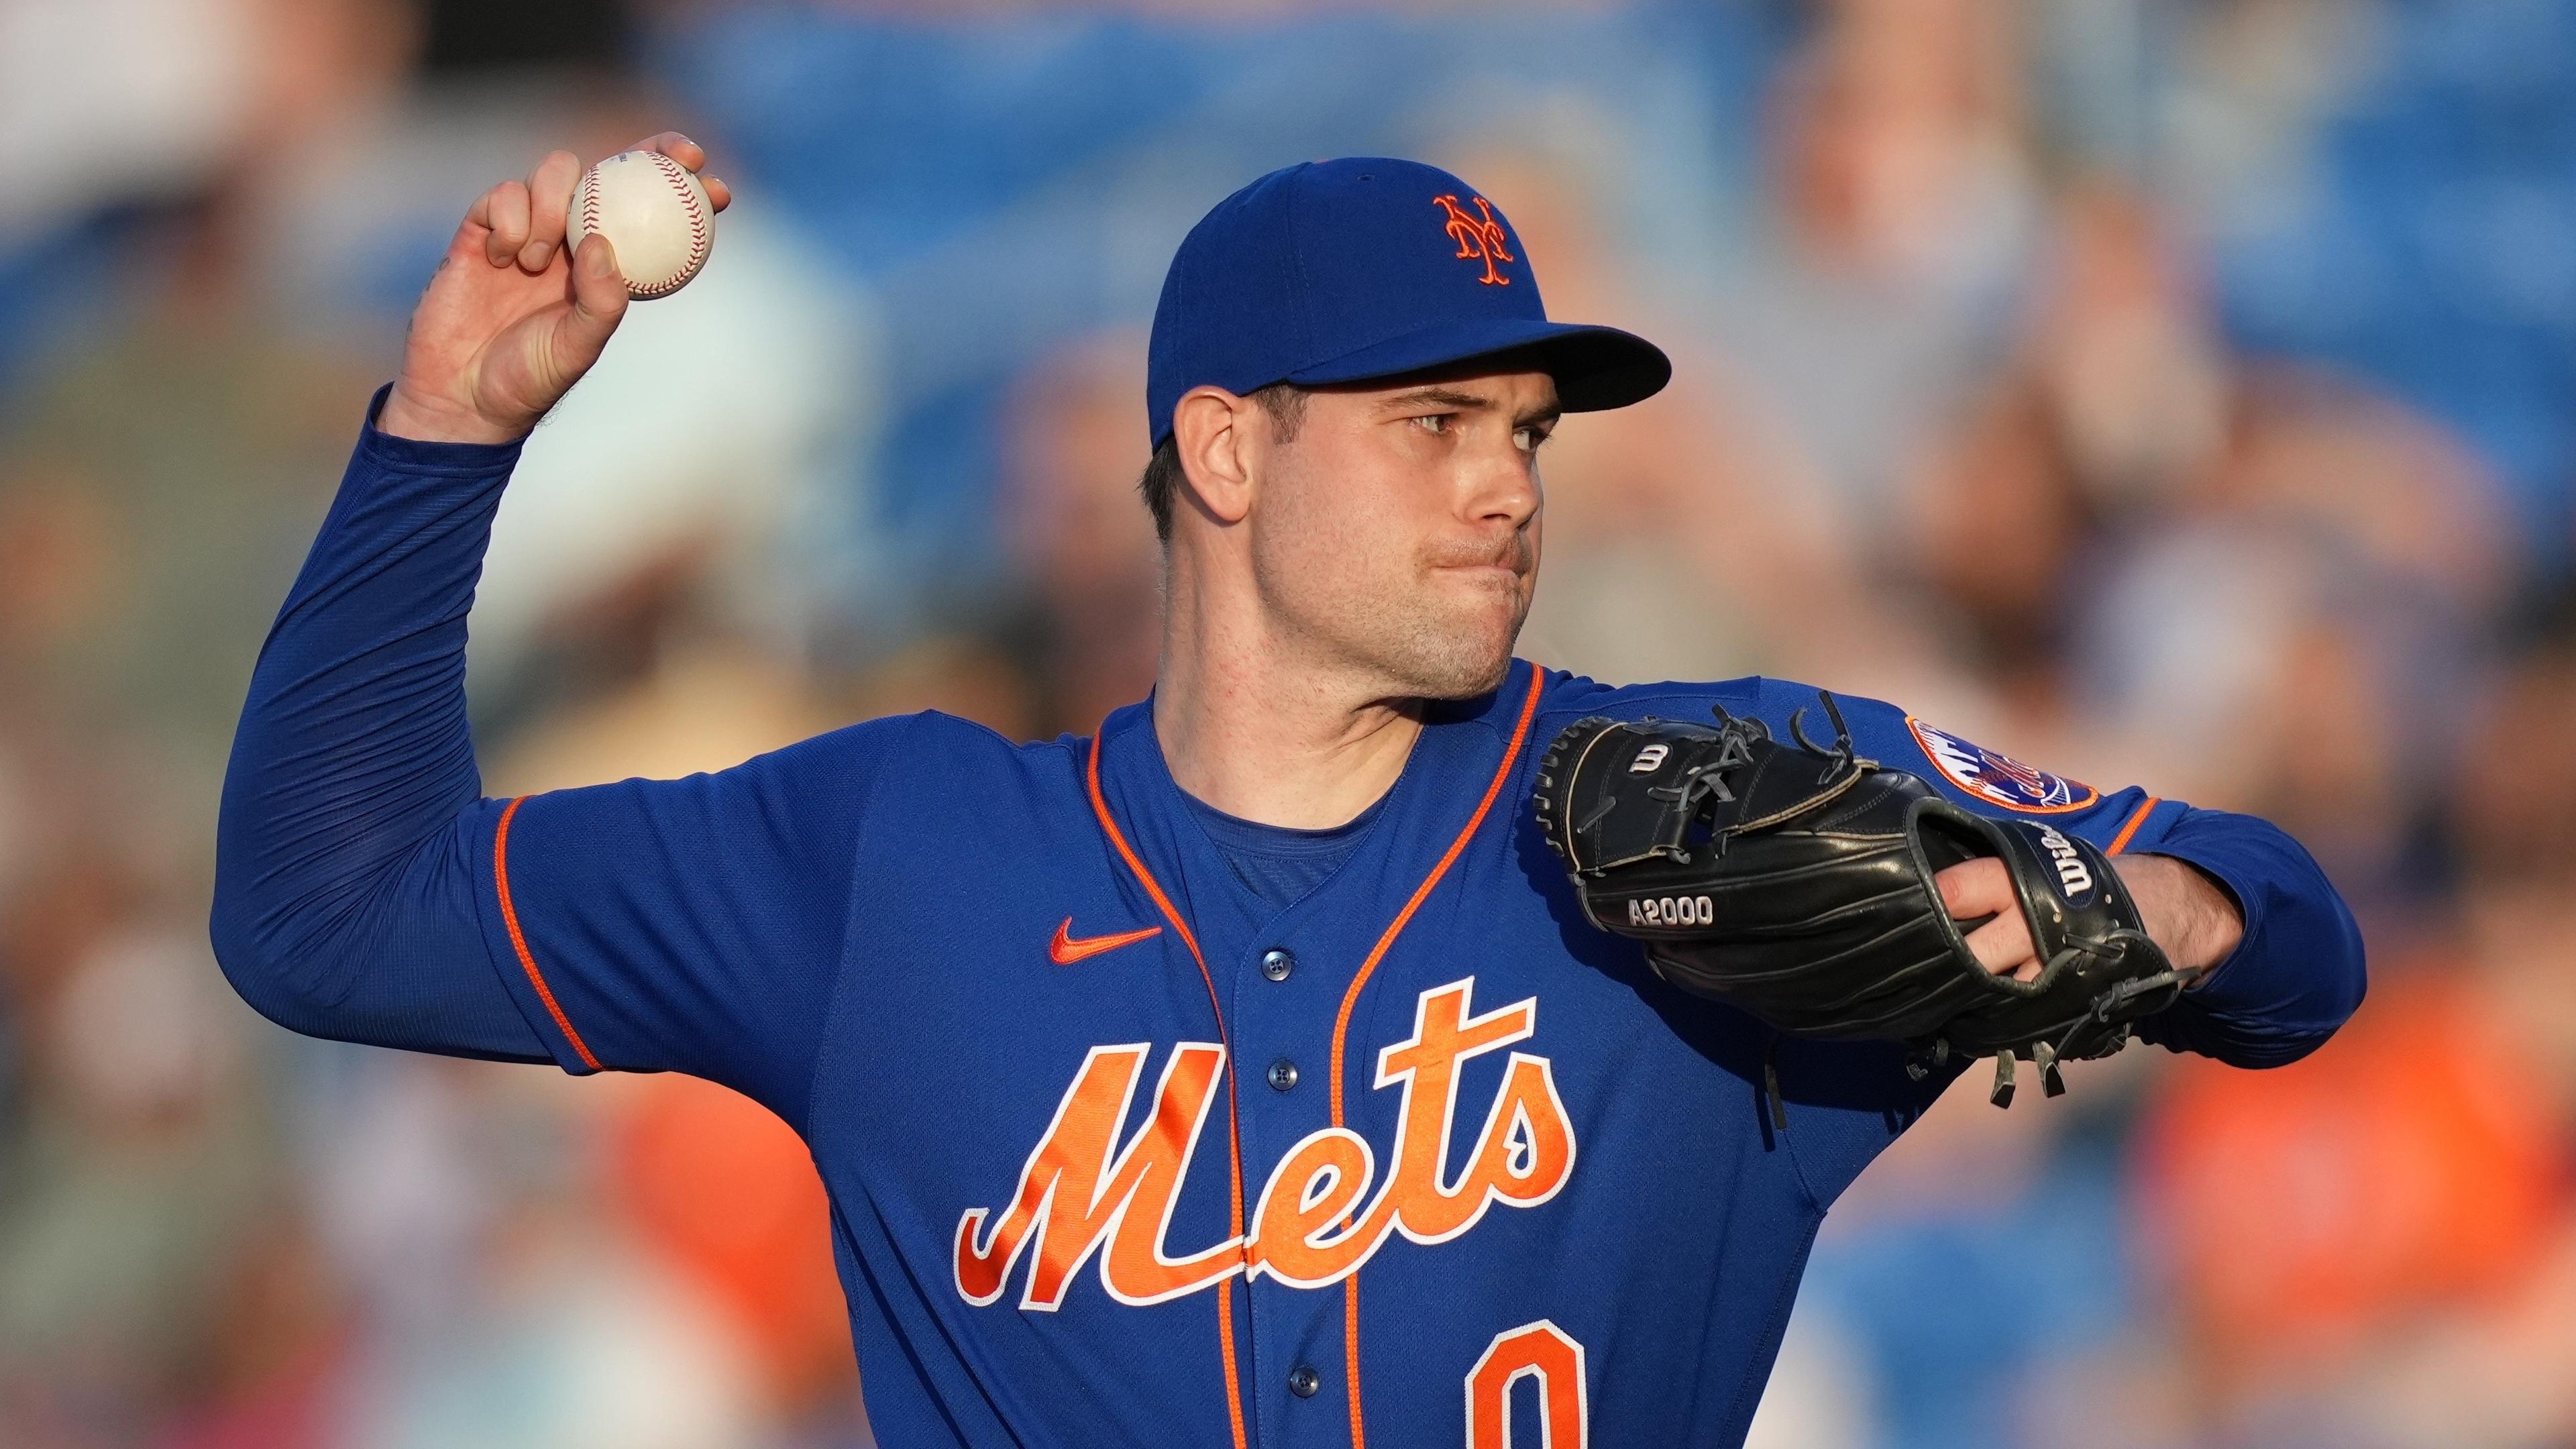 Mar 22, 2022; Port St. Lucie, Florida, USA; New York Mets relief pitcher Adam Ottavino (0) delivers a pitch in the third inning of the spring training game against the Houston Astro at Clover Park. Mandatory Credit: Jasen Vinlove-USA TODAY Sports / © Jasen Vinlove-USA TODAY Sports